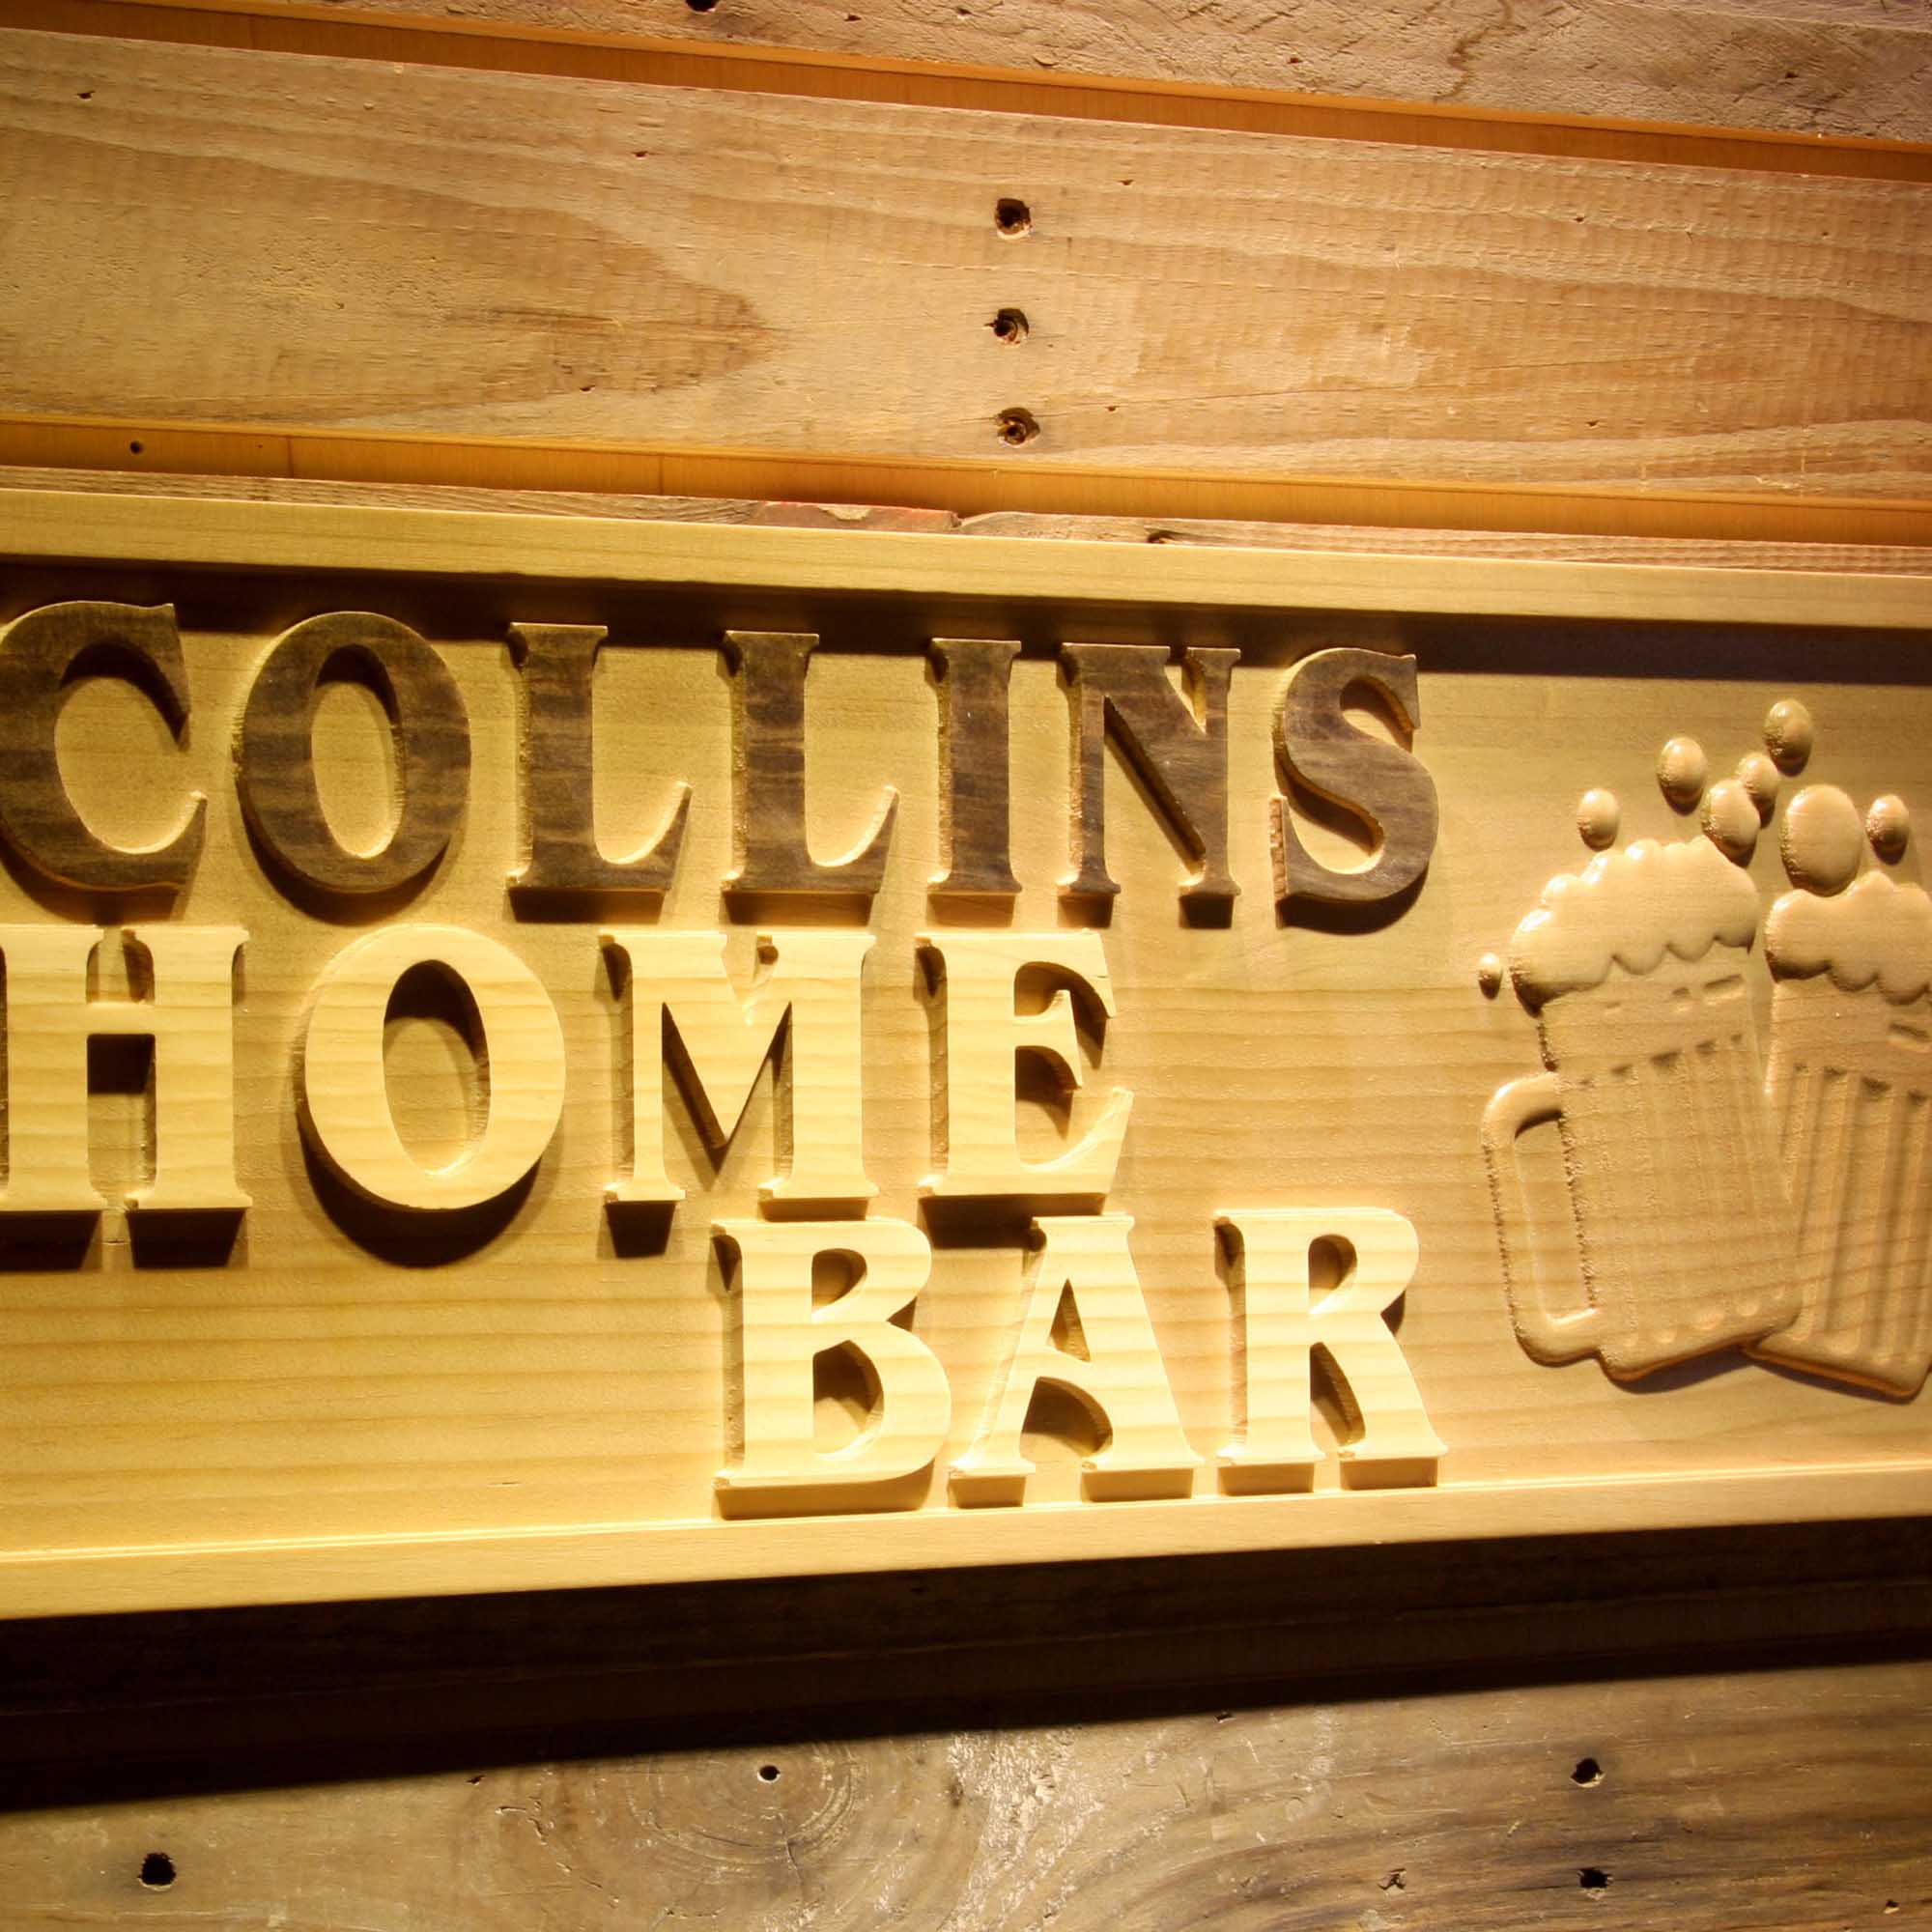 Personalized Home BAR Cheers Beer Ale Wine Cocktails Décor Gifts Wood Engraved Wooden Sign